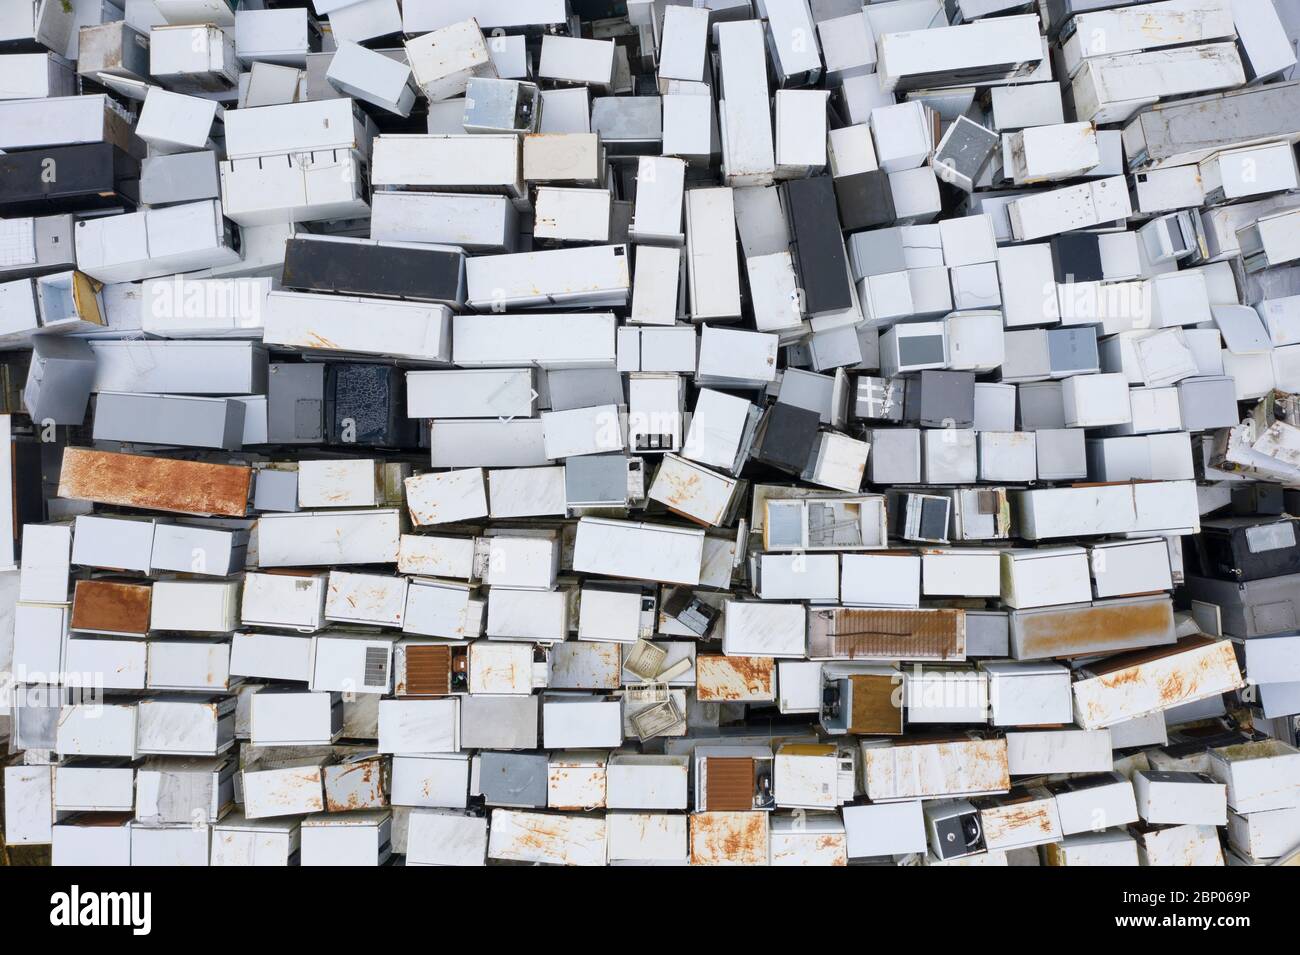 Many old refrigerators awaiting recycling at a Waste Electrical and Electronic Equipment (WEEE) plant in Perth, Scotland, UK Stock Photo